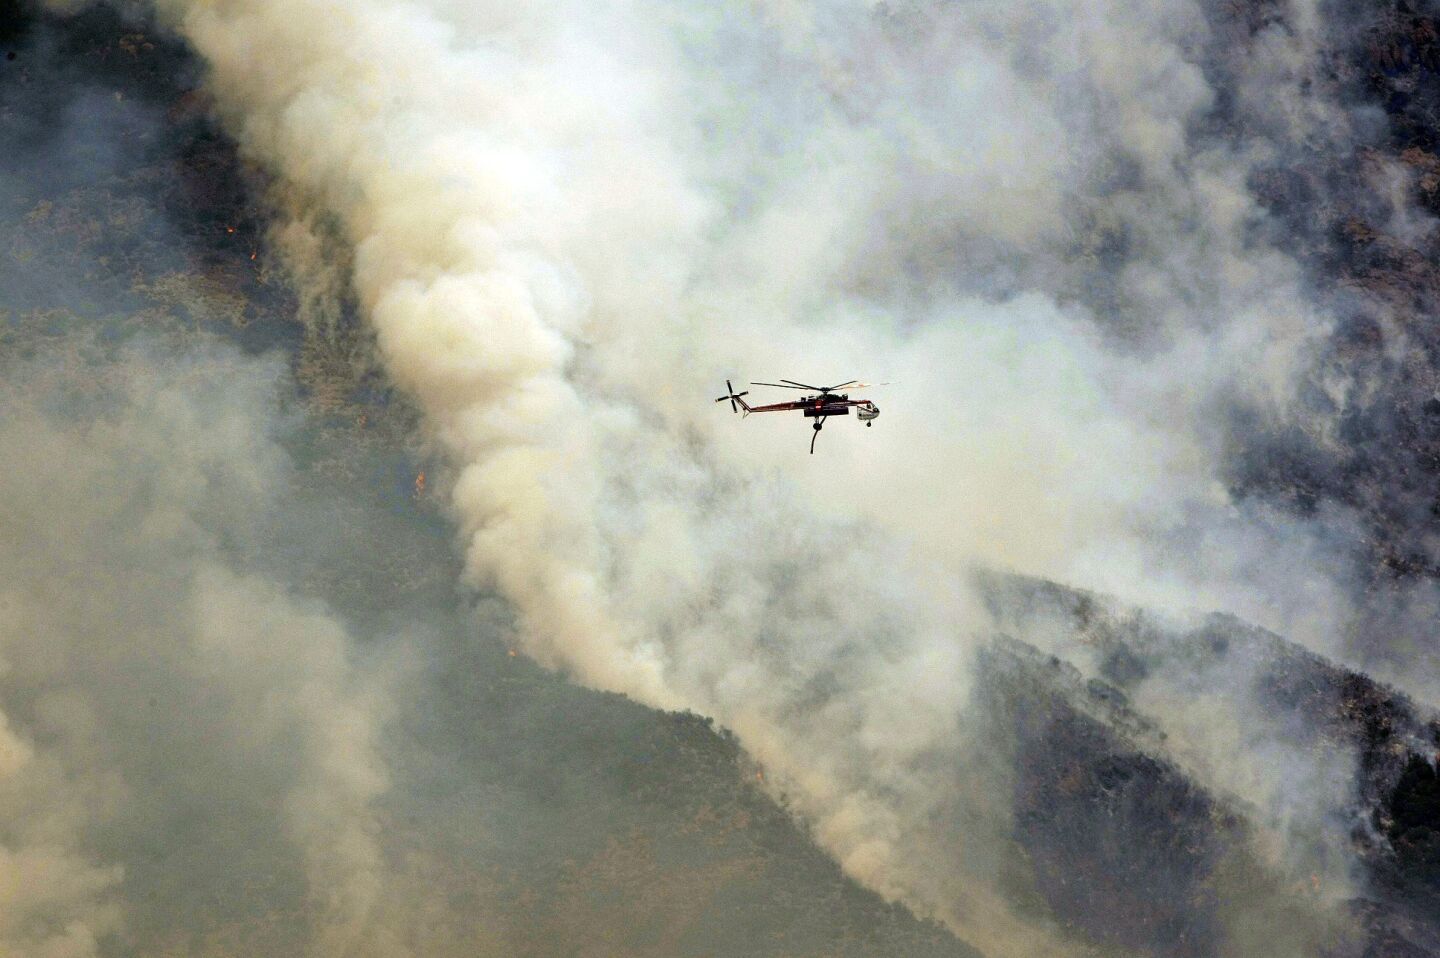 A firefighting helicopter is dwarfed by smoke and ash from the Springs fire in the mountains above Malibu.